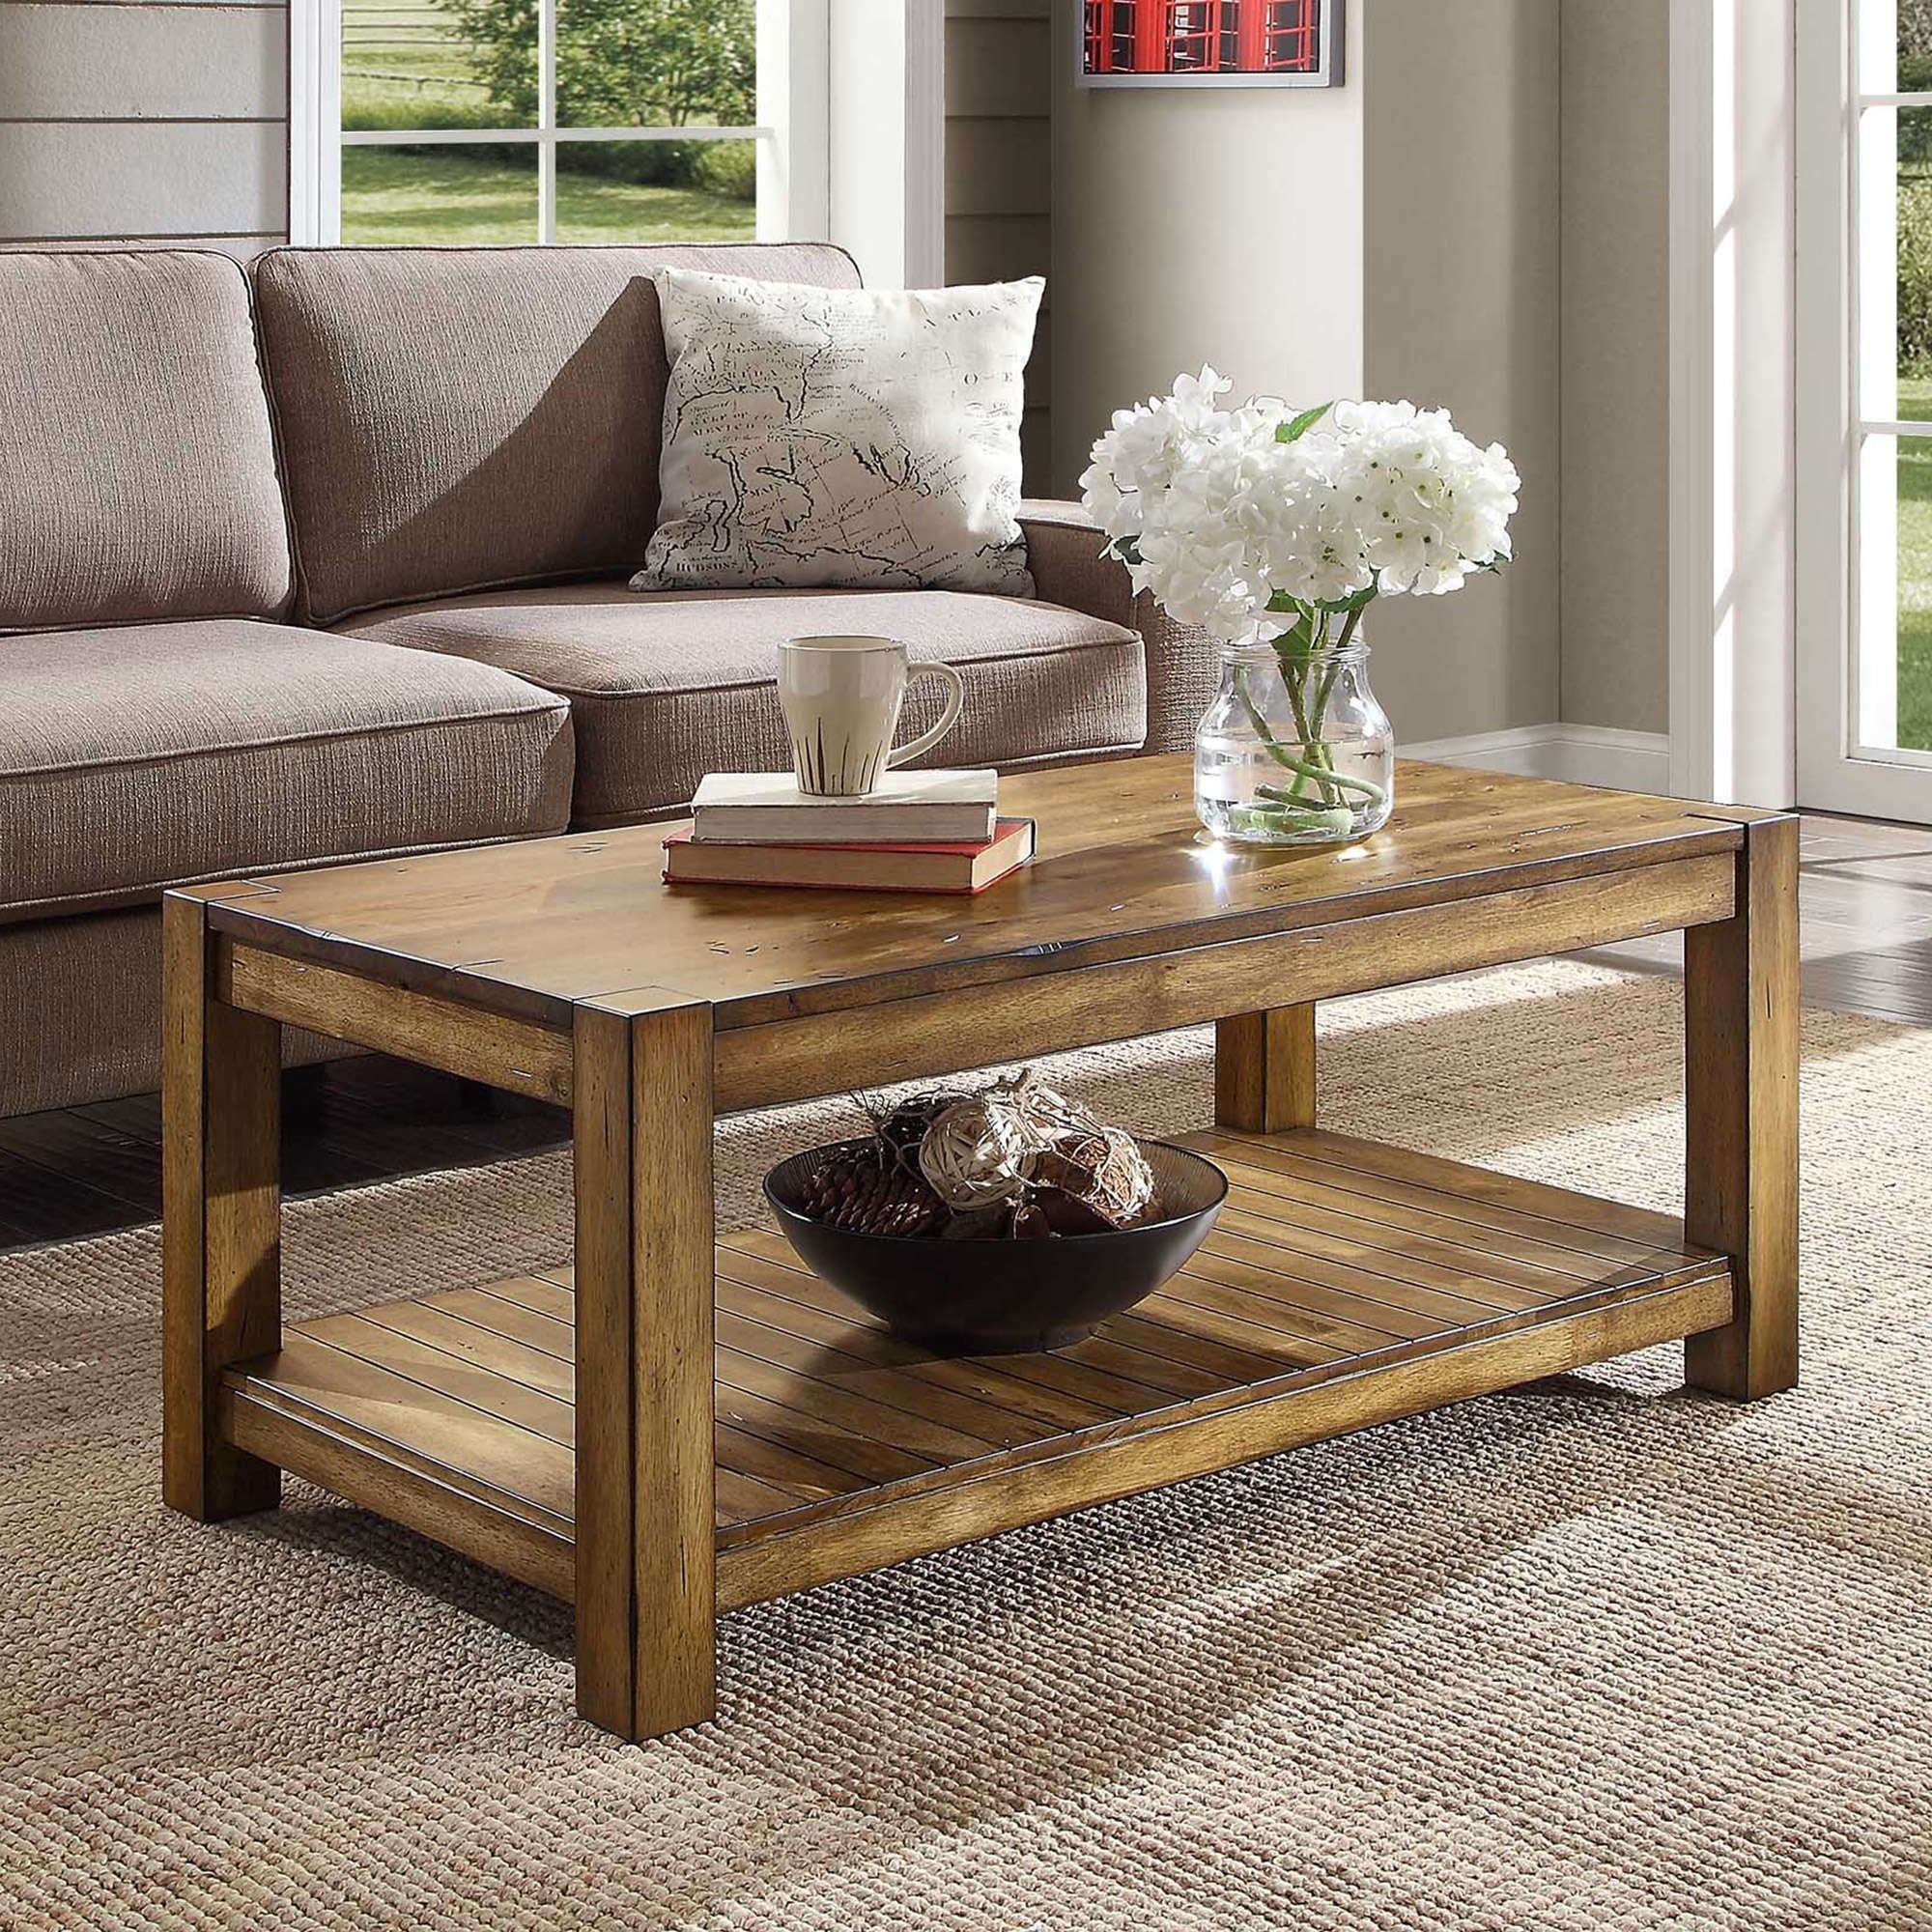 Bryant Solid Wood Coffee Table, Rustic Maple Brown Finish – Walmart For Rustic Wood Coffee Tables (Photo 4 of 15)